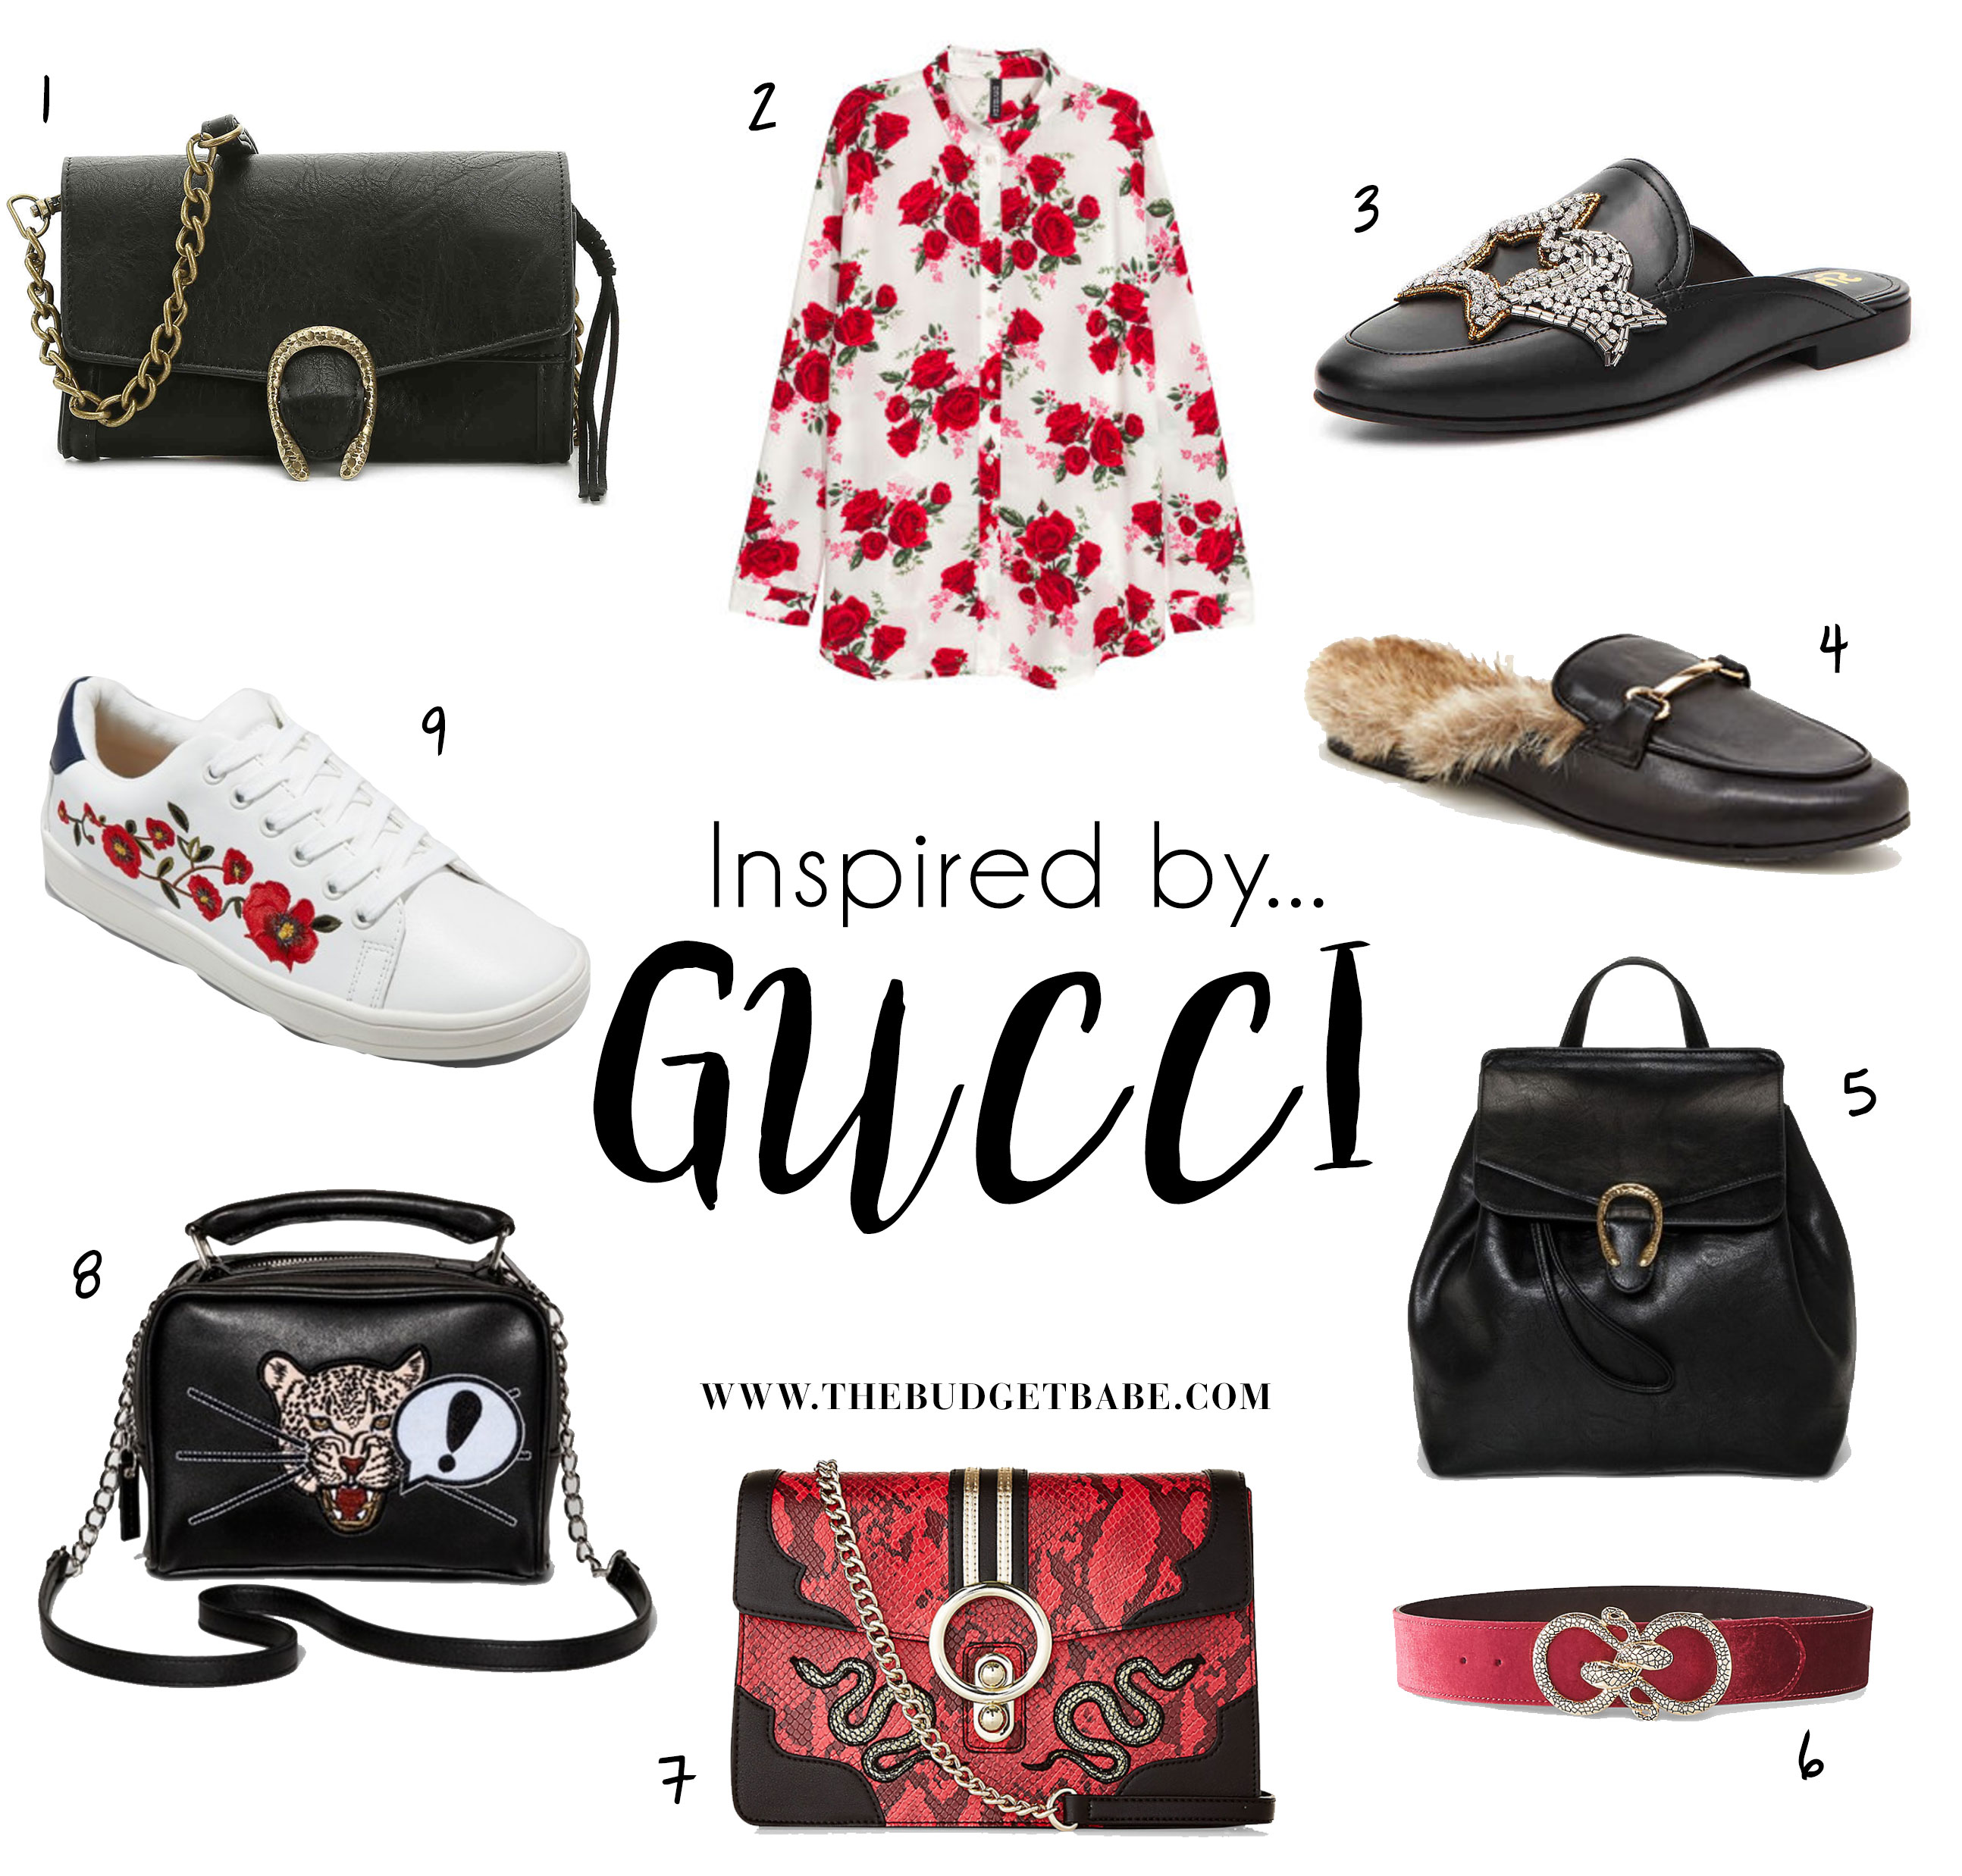 Shop fashions under $50 inspired by Gucci.